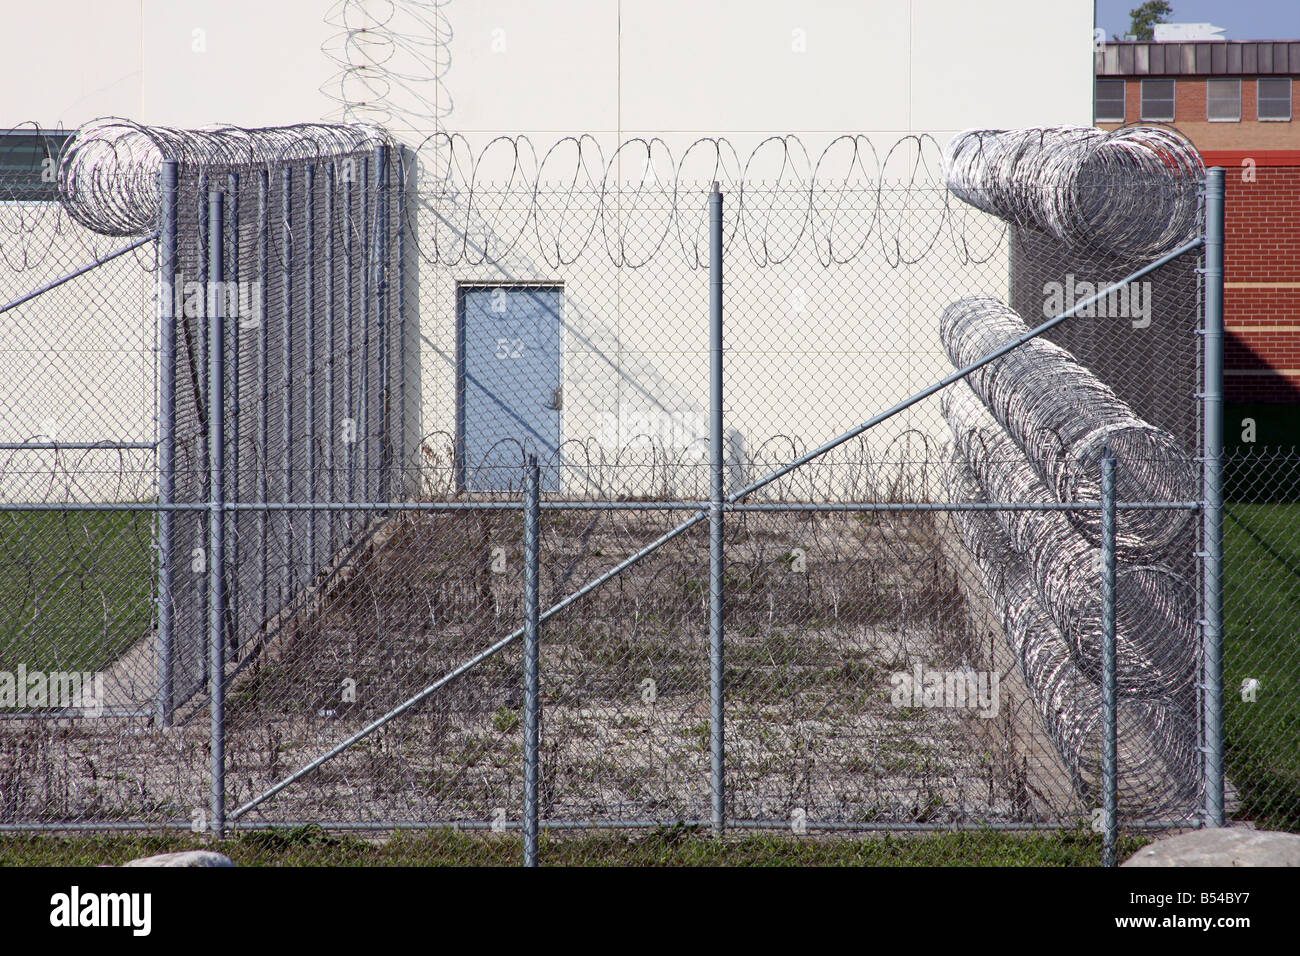 A prison barrier fence Stock Photo